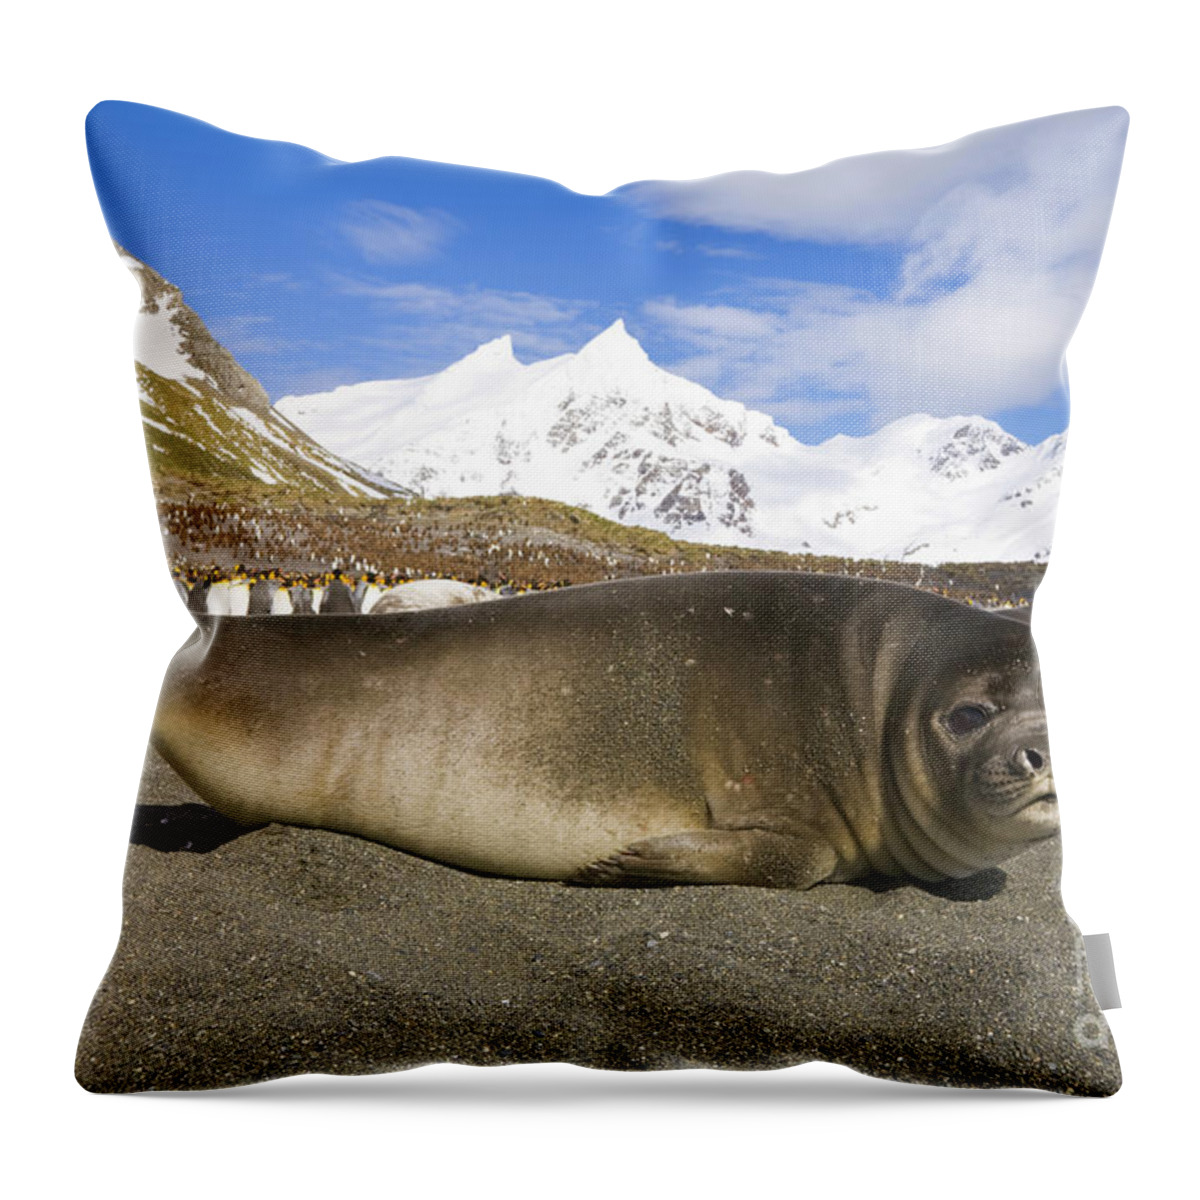 00346000 Throw Pillow featuring the photograph Southern Elephant Seal Pup by Yva Momatiuk John Eastcott